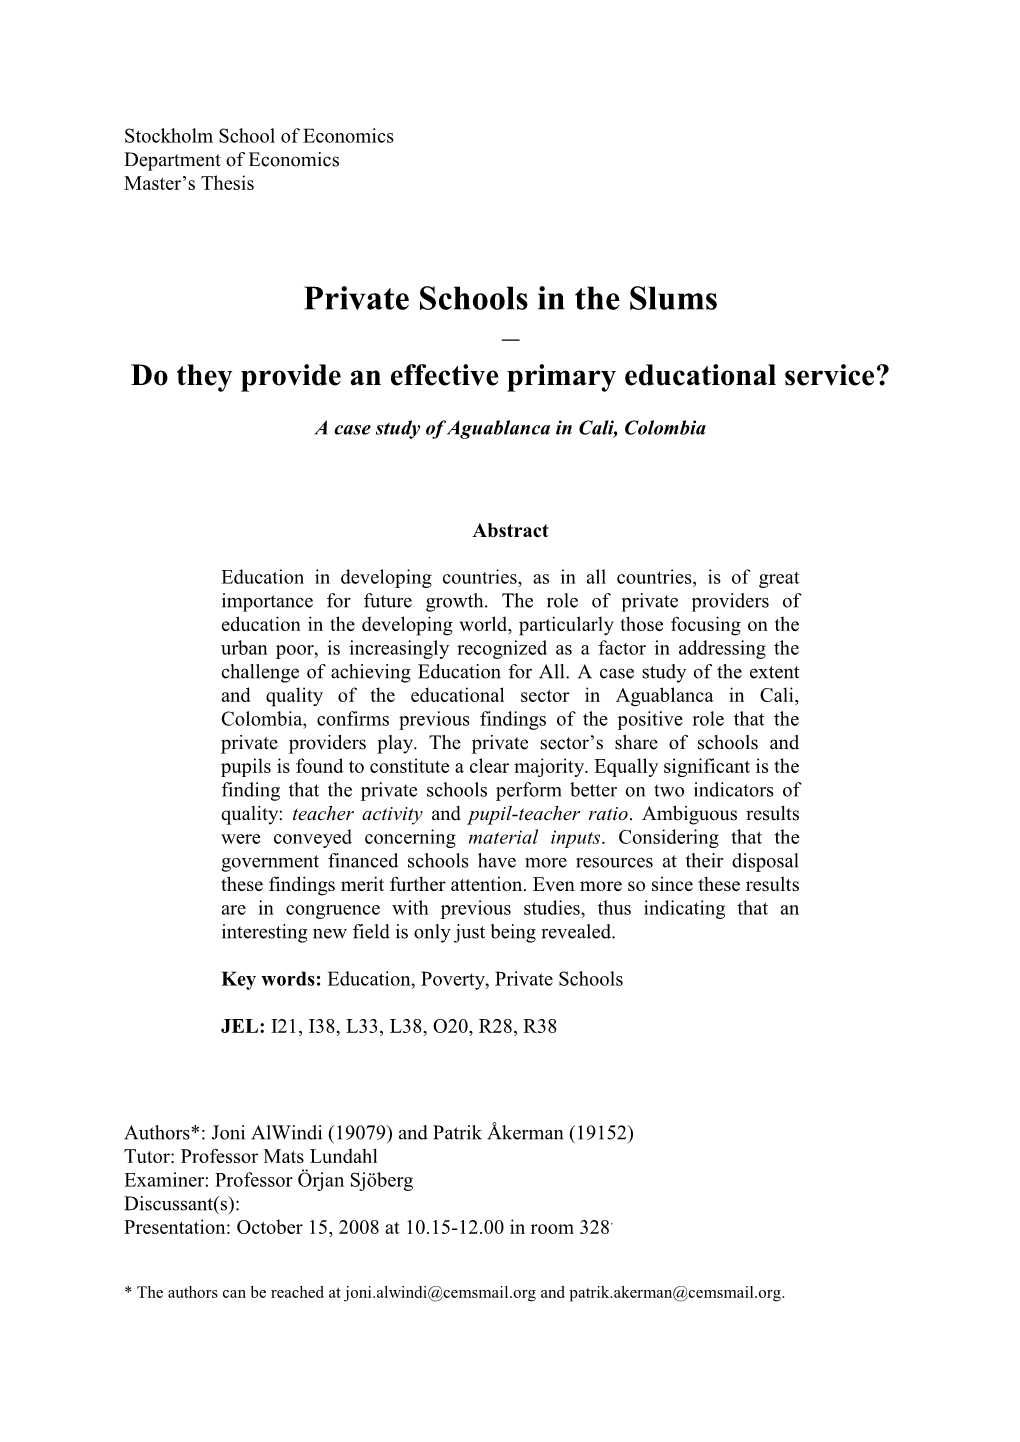 Private Schools in the Slums – Do They Provide an Effective Primary Educational Service?